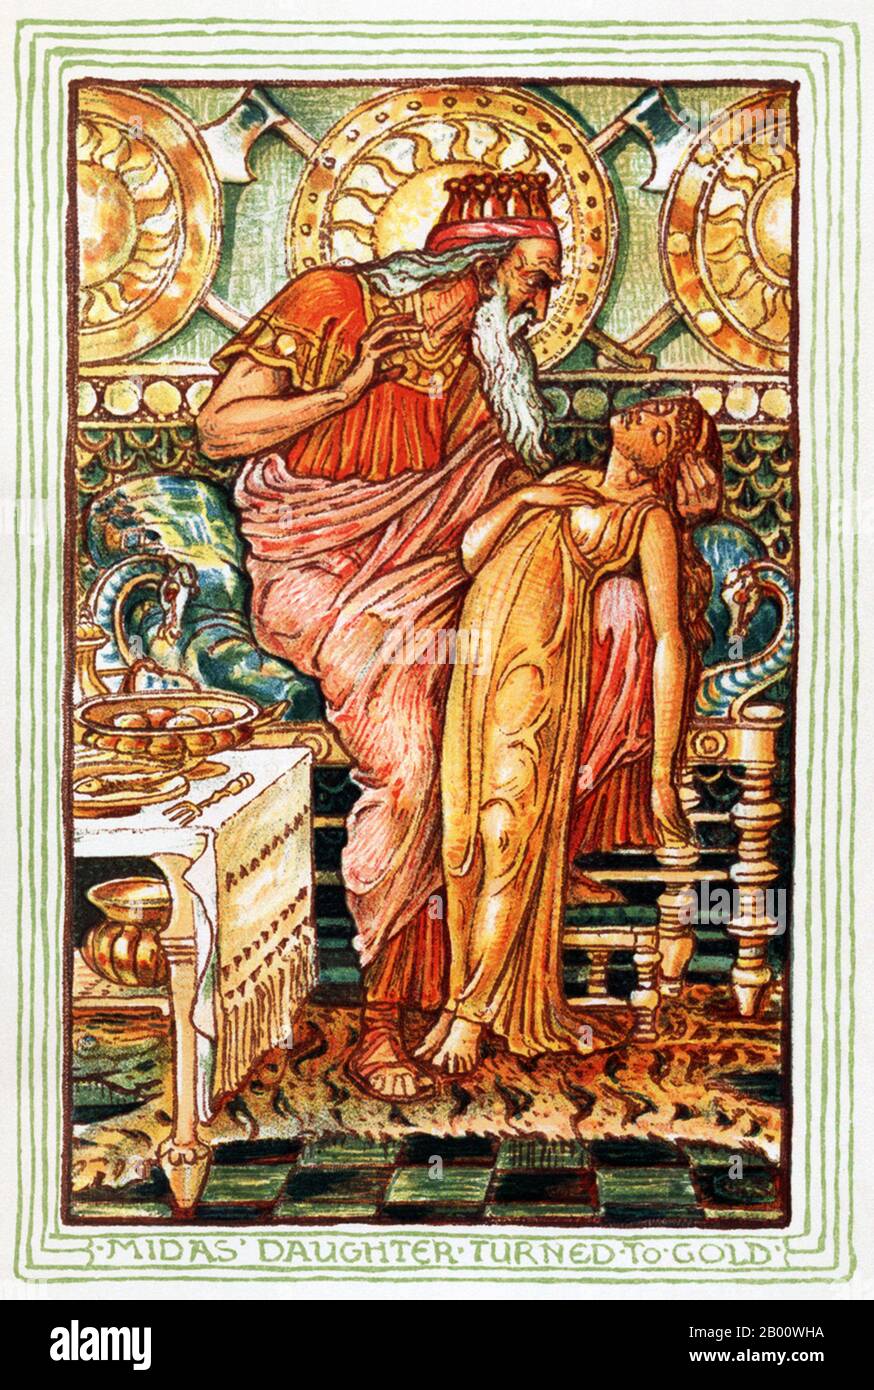 Greece: King Midas' touch turns his daughter to gold. Illustration by Walter Crane (1845-1915), 1893.  An illustration from an 1893 version of 'A Wonder Book for Boys and Girls' by Nathaniel Hawthorne, which recounted the tale of King Midas. In Greek mythology, Midas was given ability to turn everything he touched into gold by the god Dionysus. However, he soon discovered that he was unable to even eat. Dionysus told him to wash in the river Pactolus, and the power flowed in the river, which was supposedly the reason for why the river was so rich in gold in later years. Stock Photo